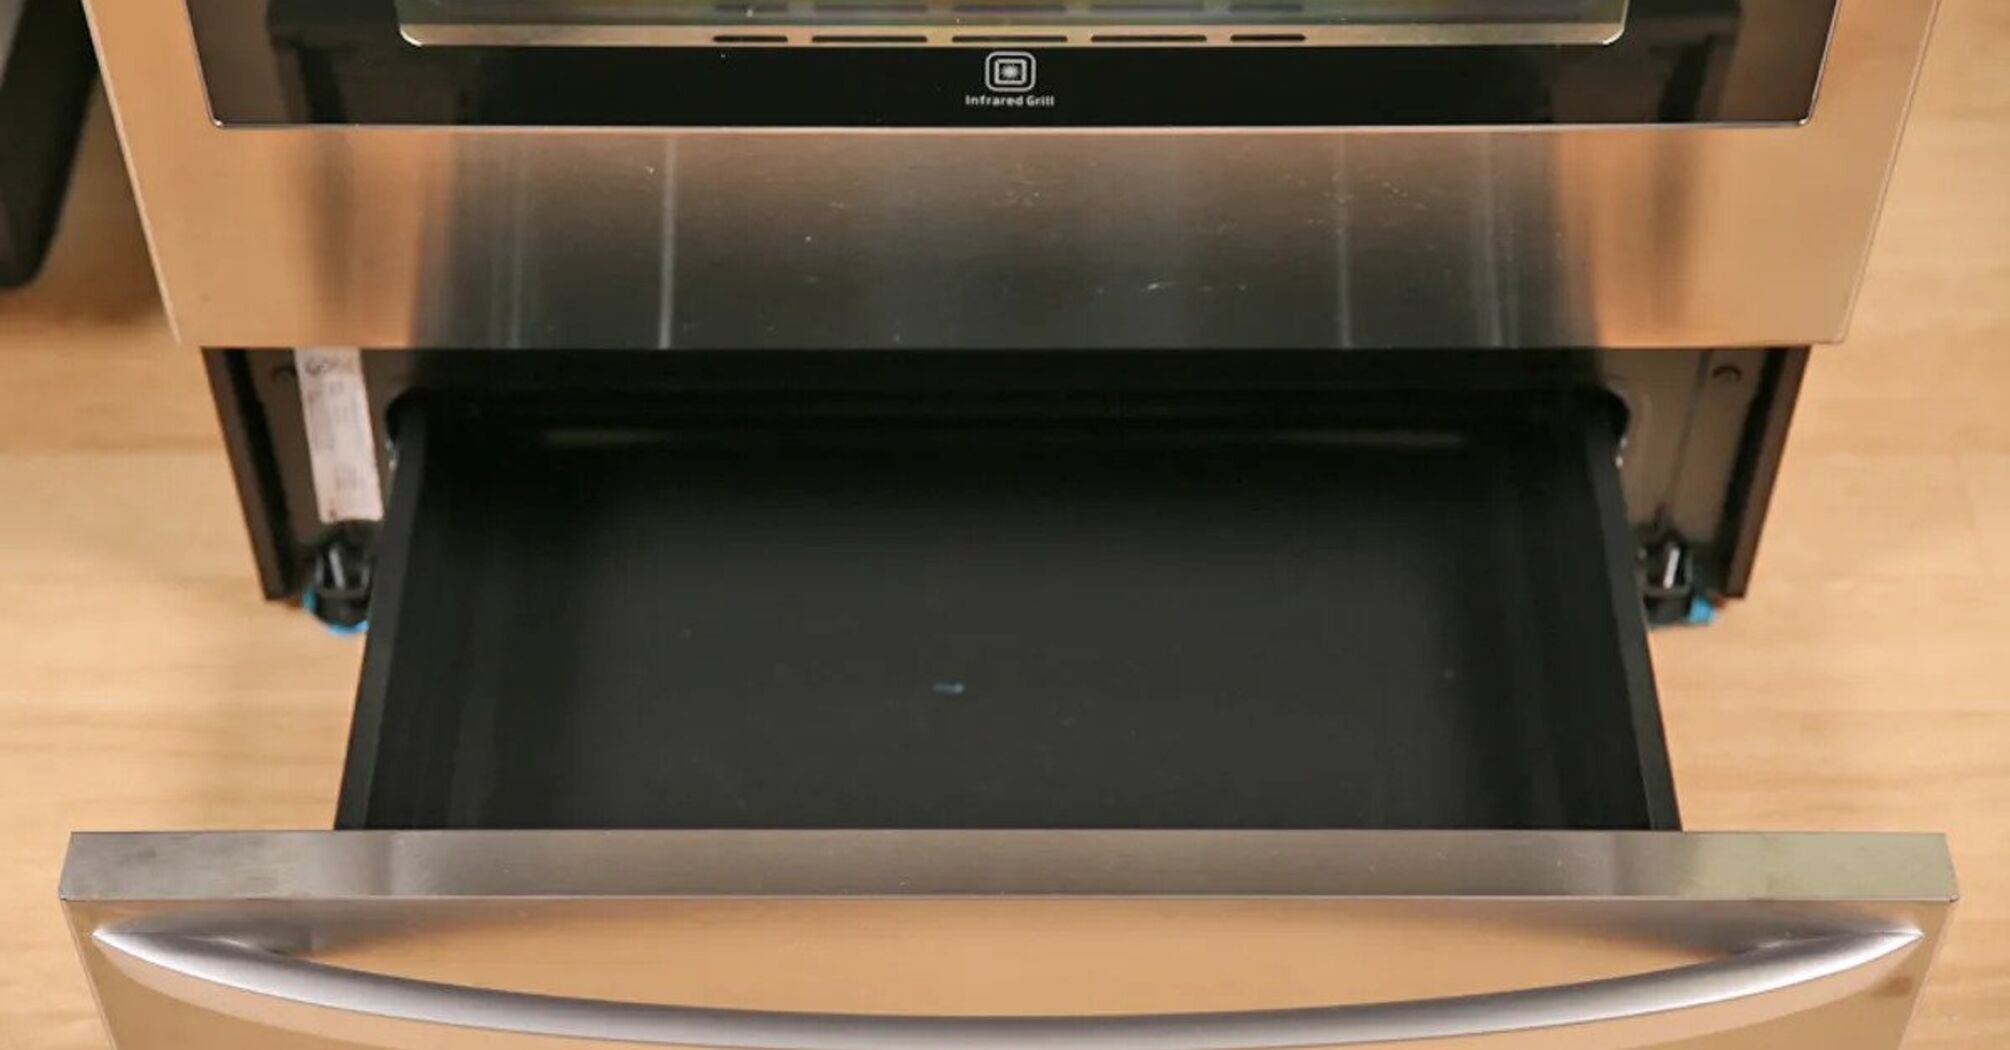 How to use the drawer under the cooker